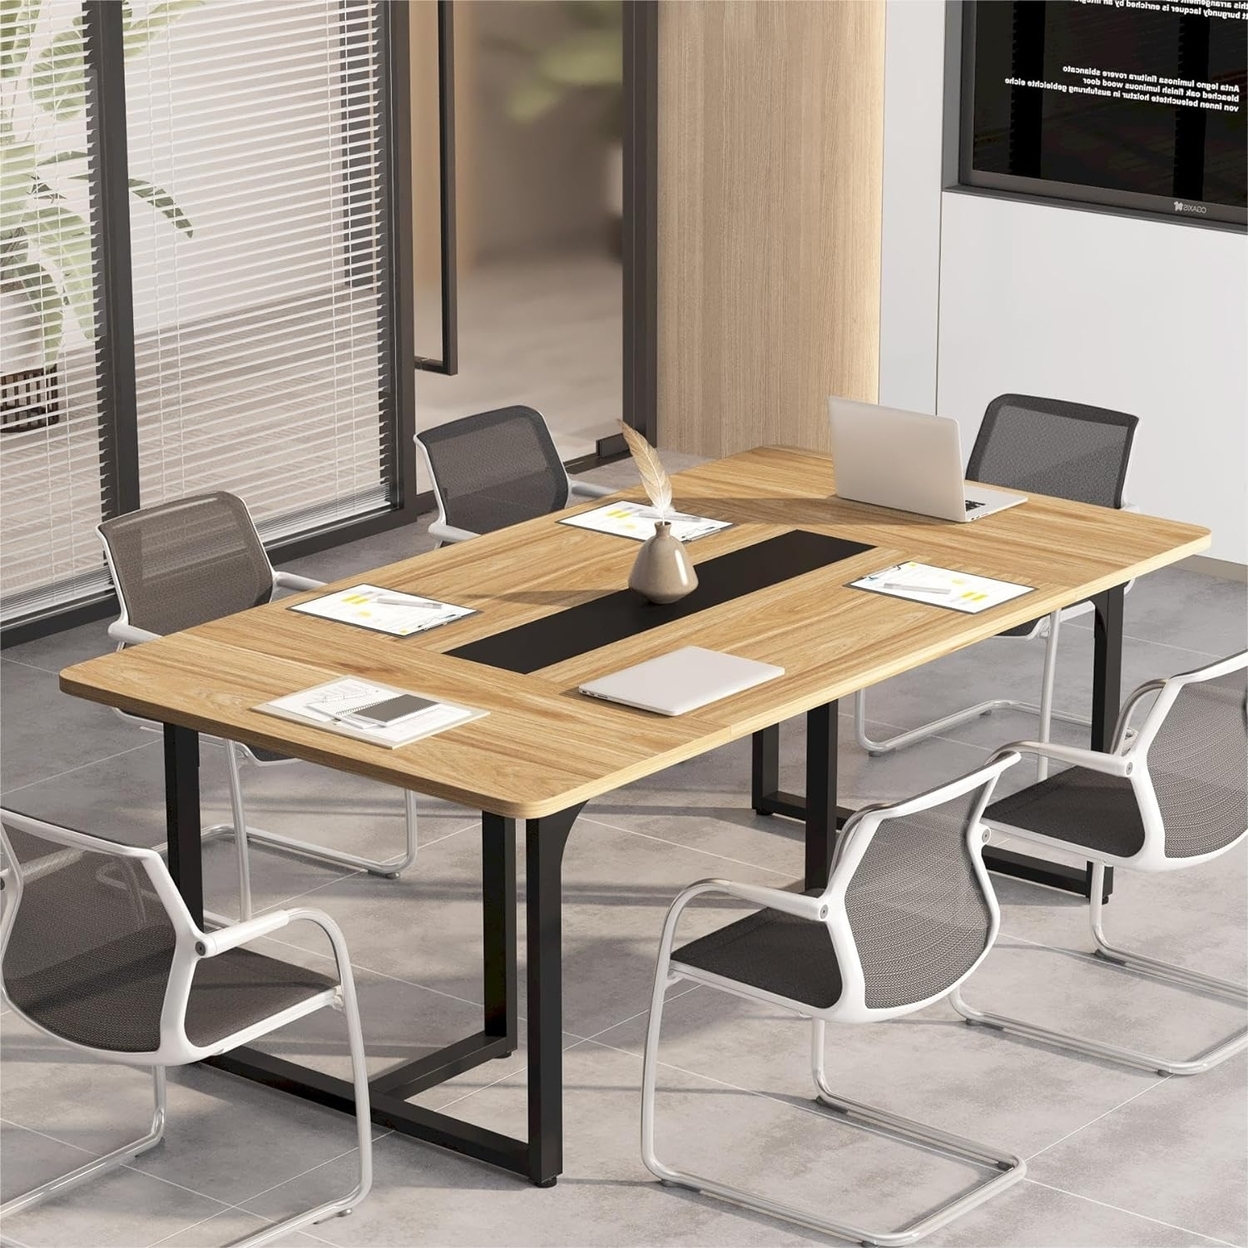 Rectangle Conference Table, Business Style Large Office Conference Room Table Boardroom Desk With Strong Metal Legs - Retro Brown